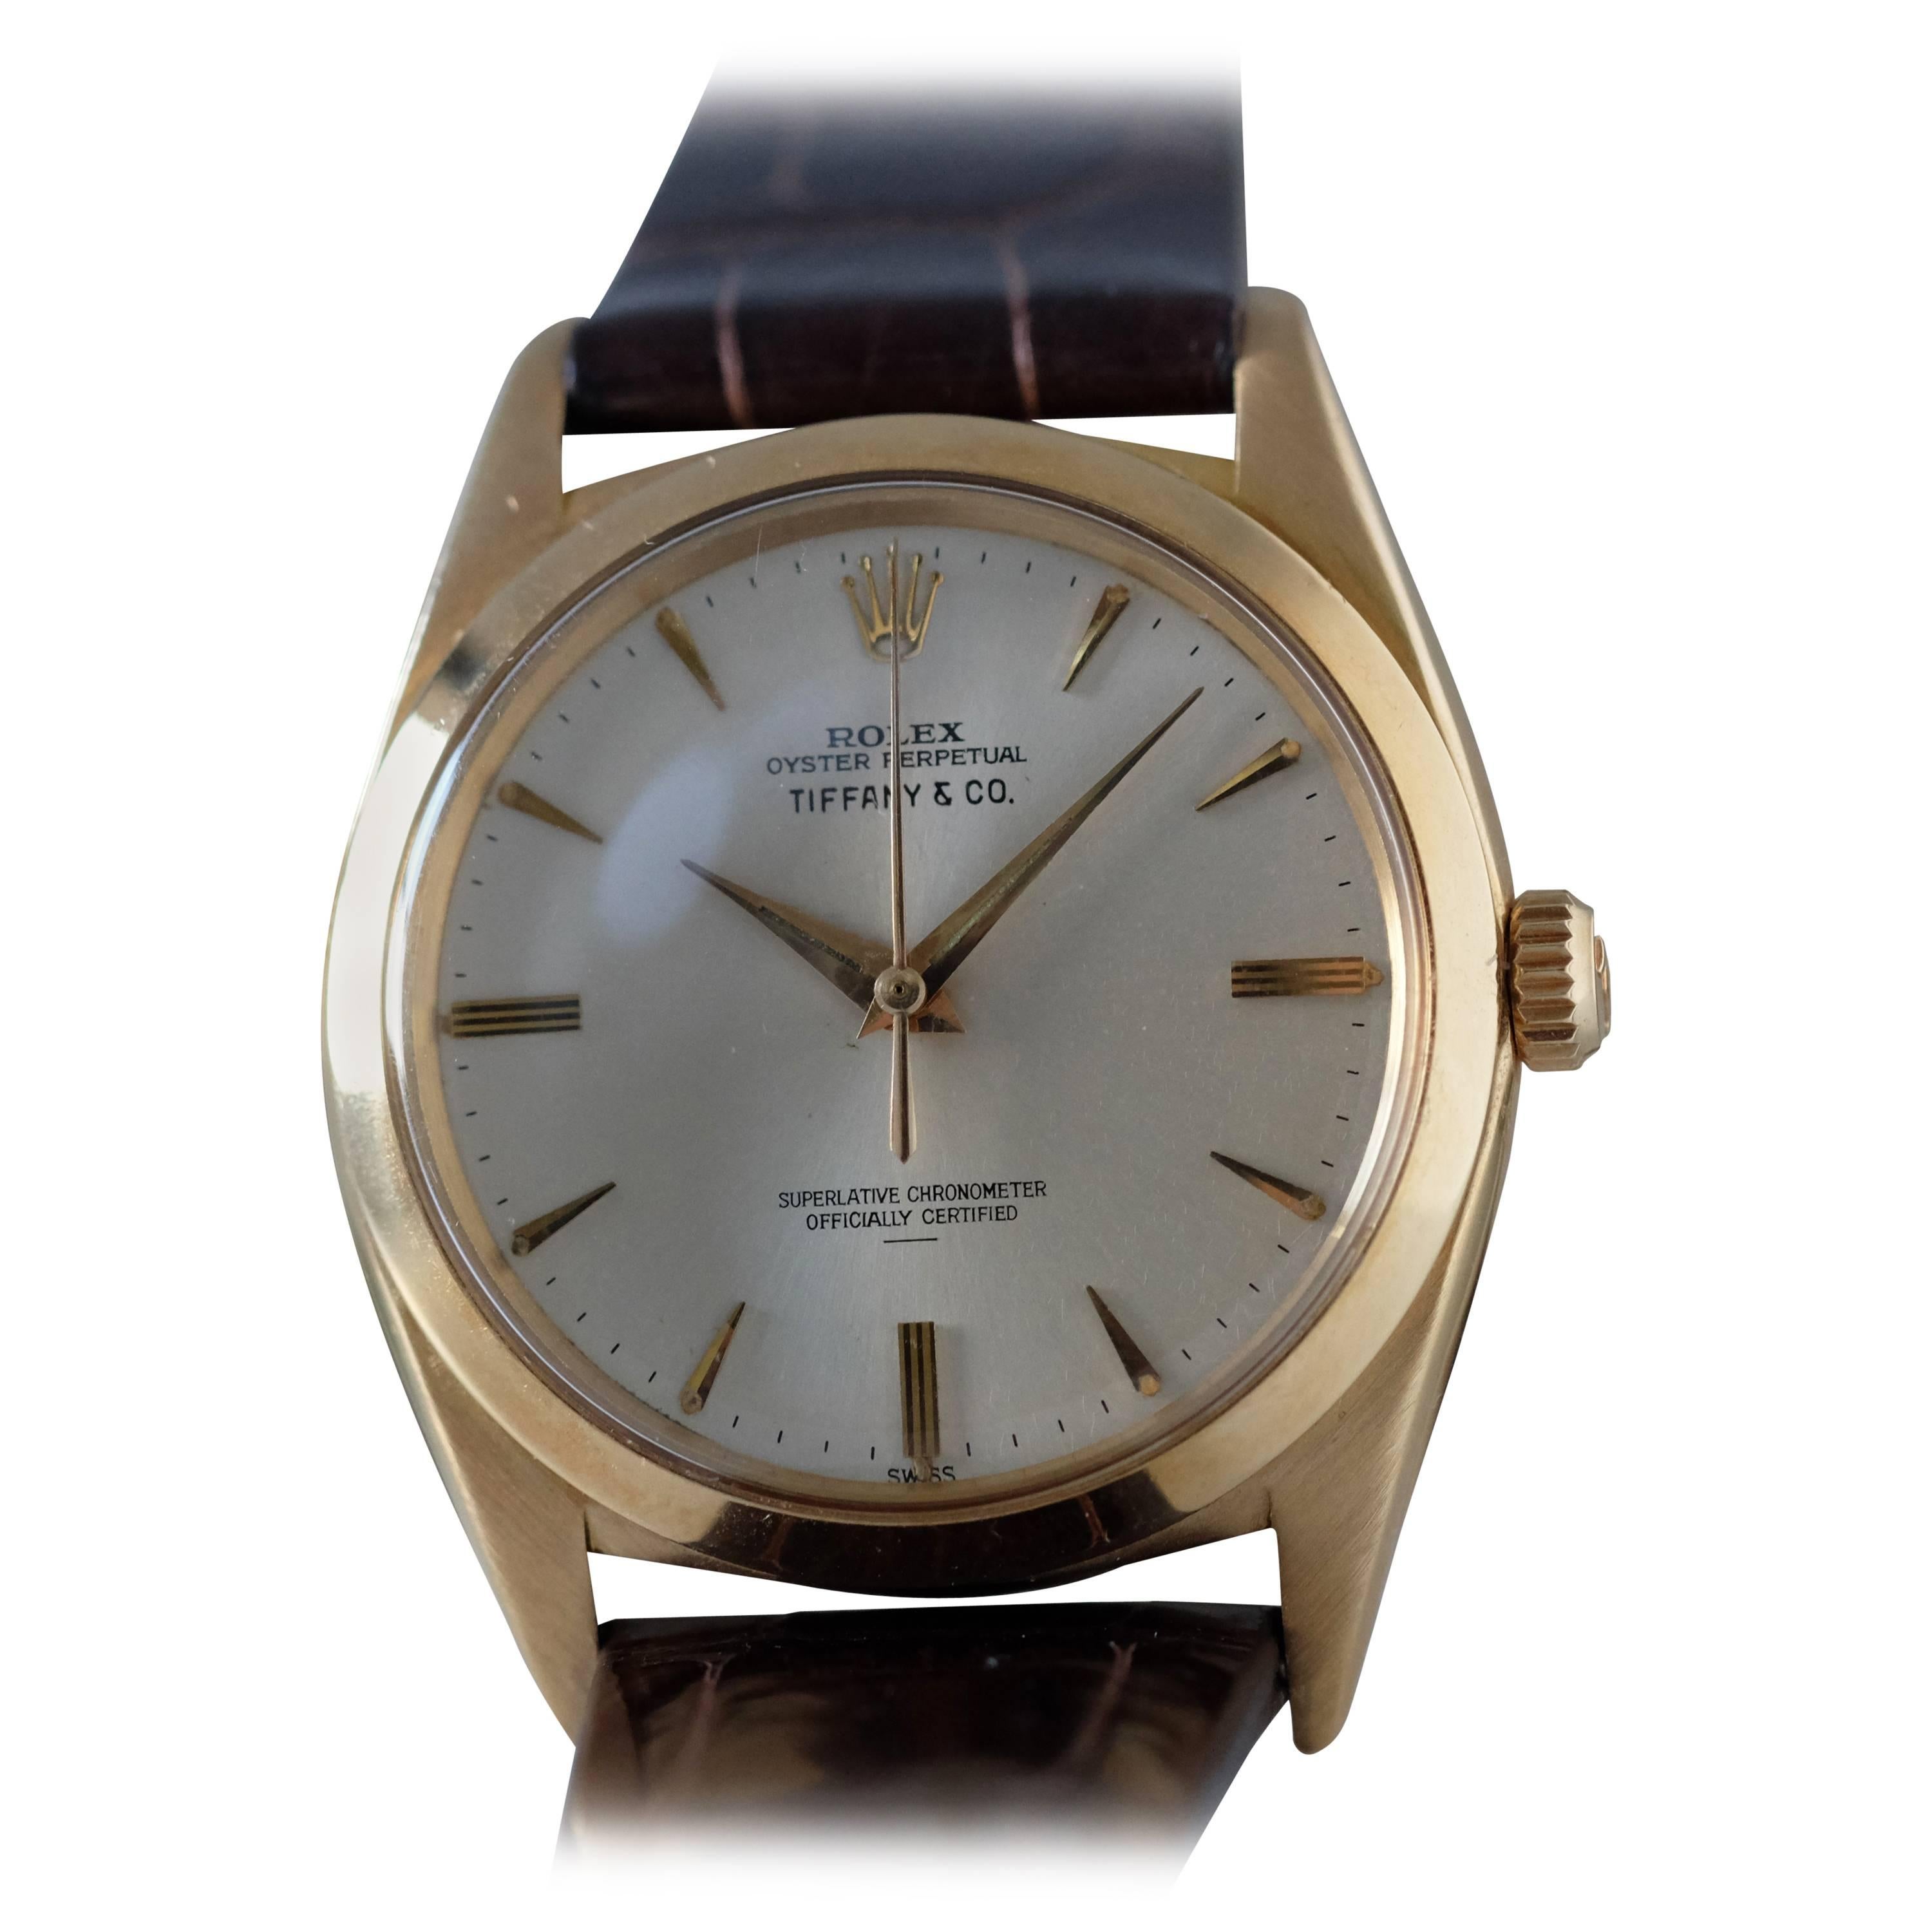 Rolex for Tiffany & Co. Yellow Gold Oyster Perpetual Wristwatch